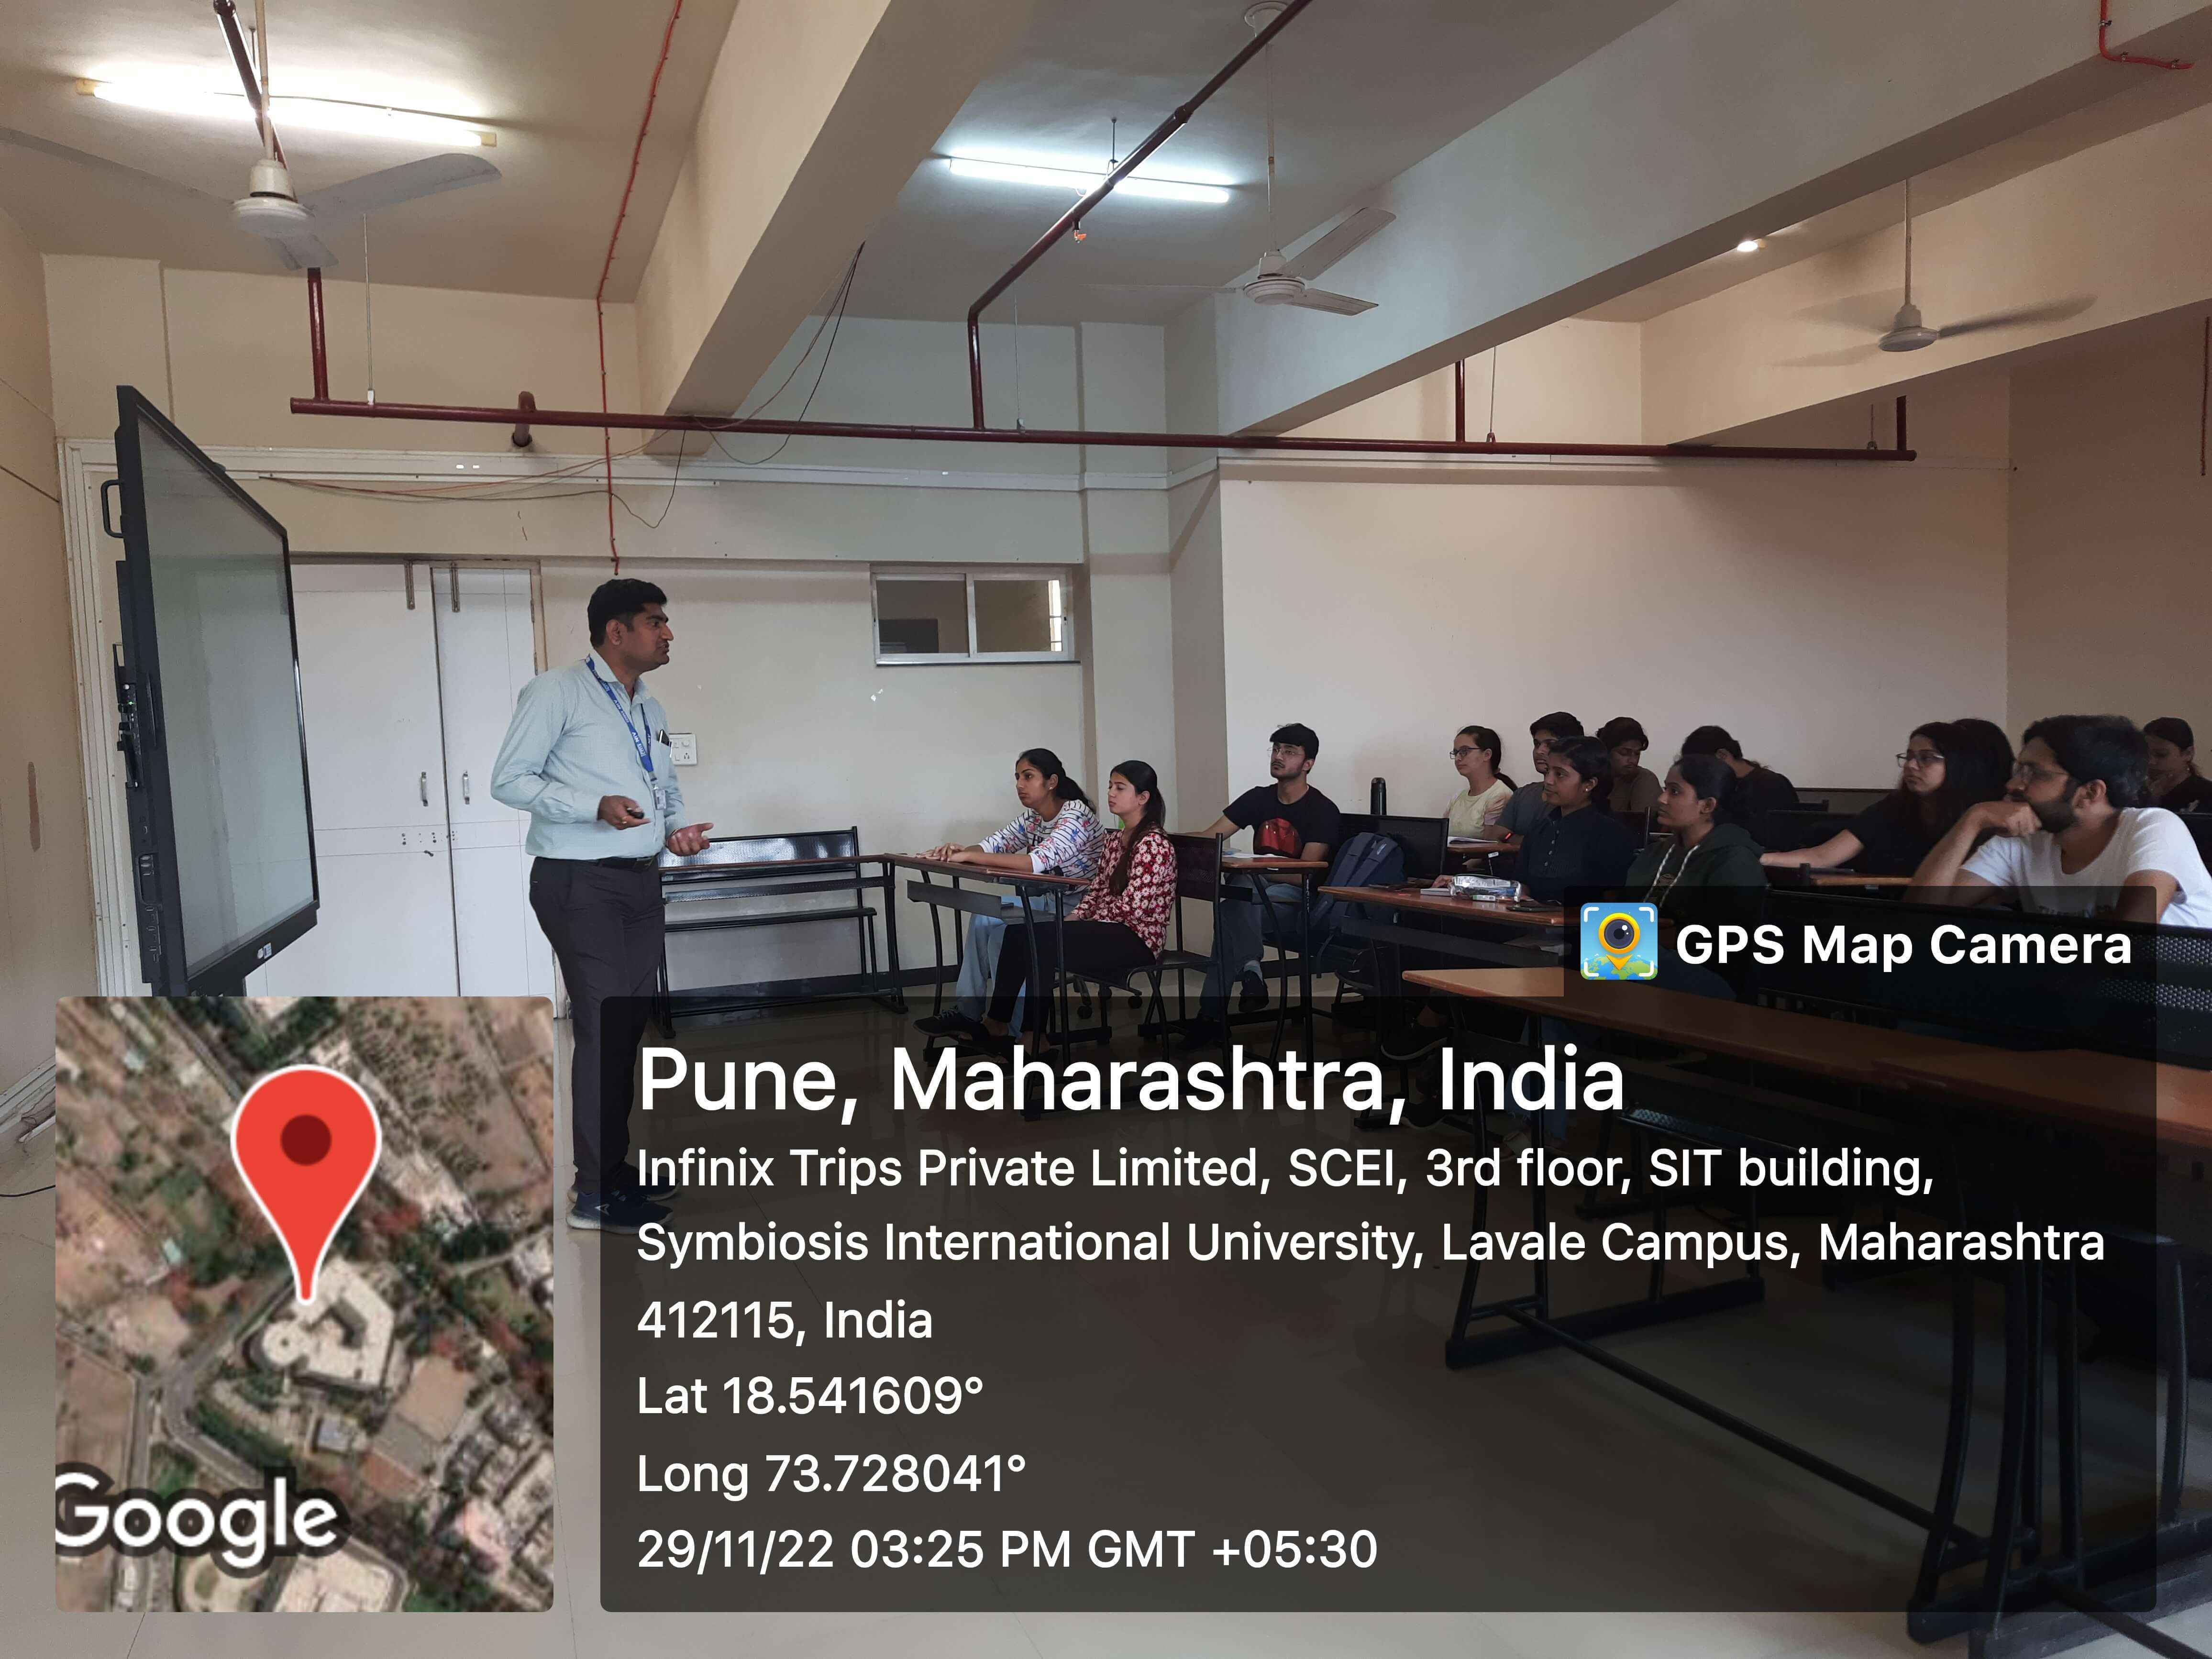  Dr. Dilip Patil, Scientist E, Department of Animal House Group National Institute of Virology, Pune. 29th November 2022. Lecture Title: Health monitoring in laboratory animals and microbial testing of rodents in the breeding facility.